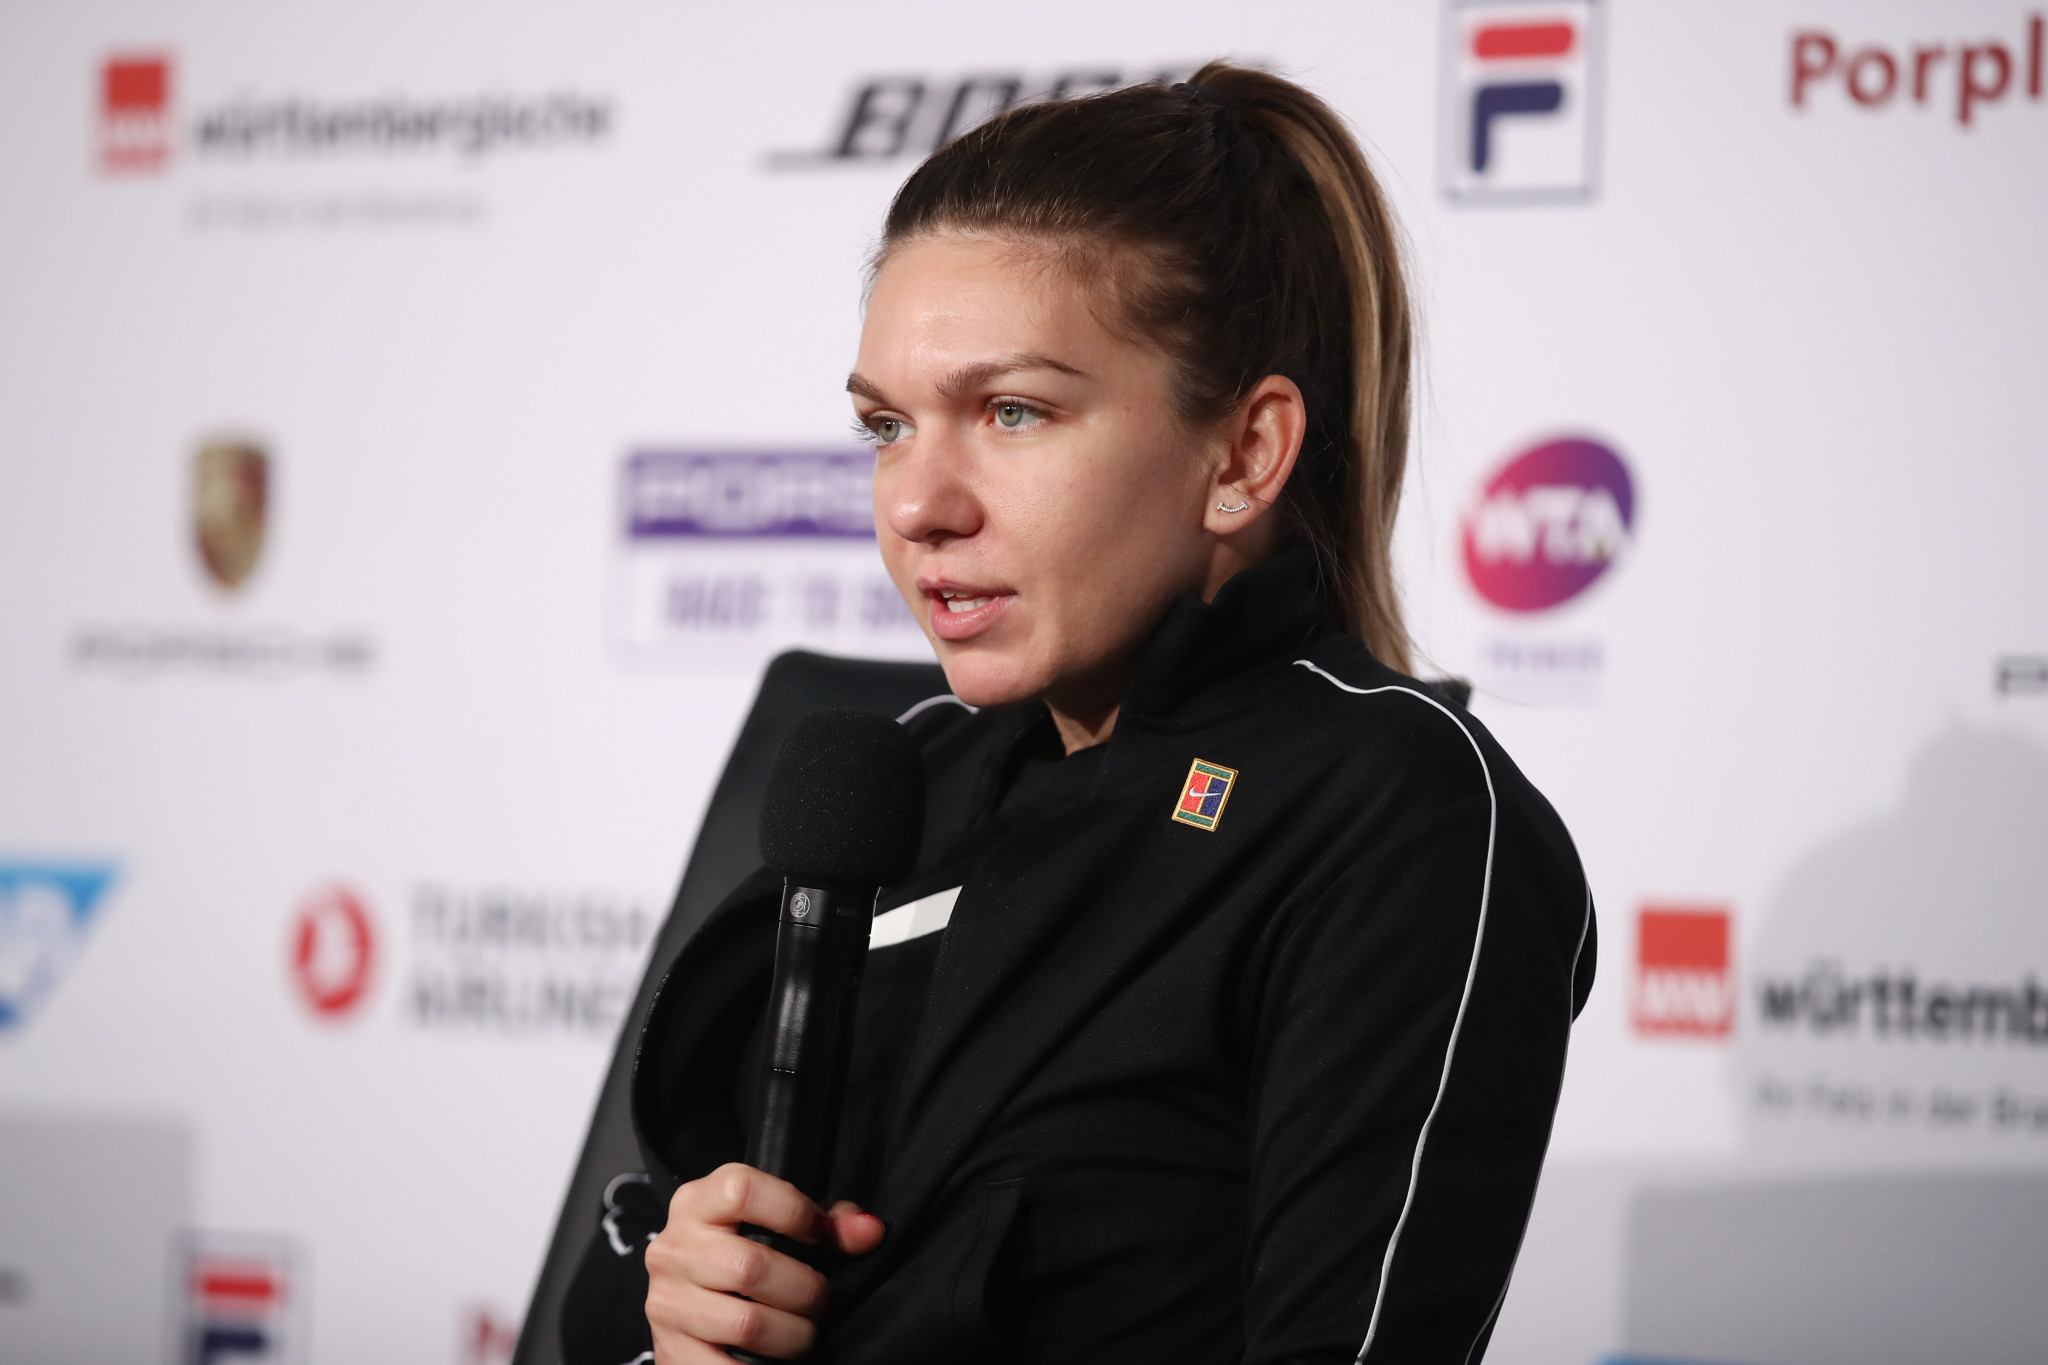  Second seed Halep pulls out of WTA Stuttgart Open with hip injury